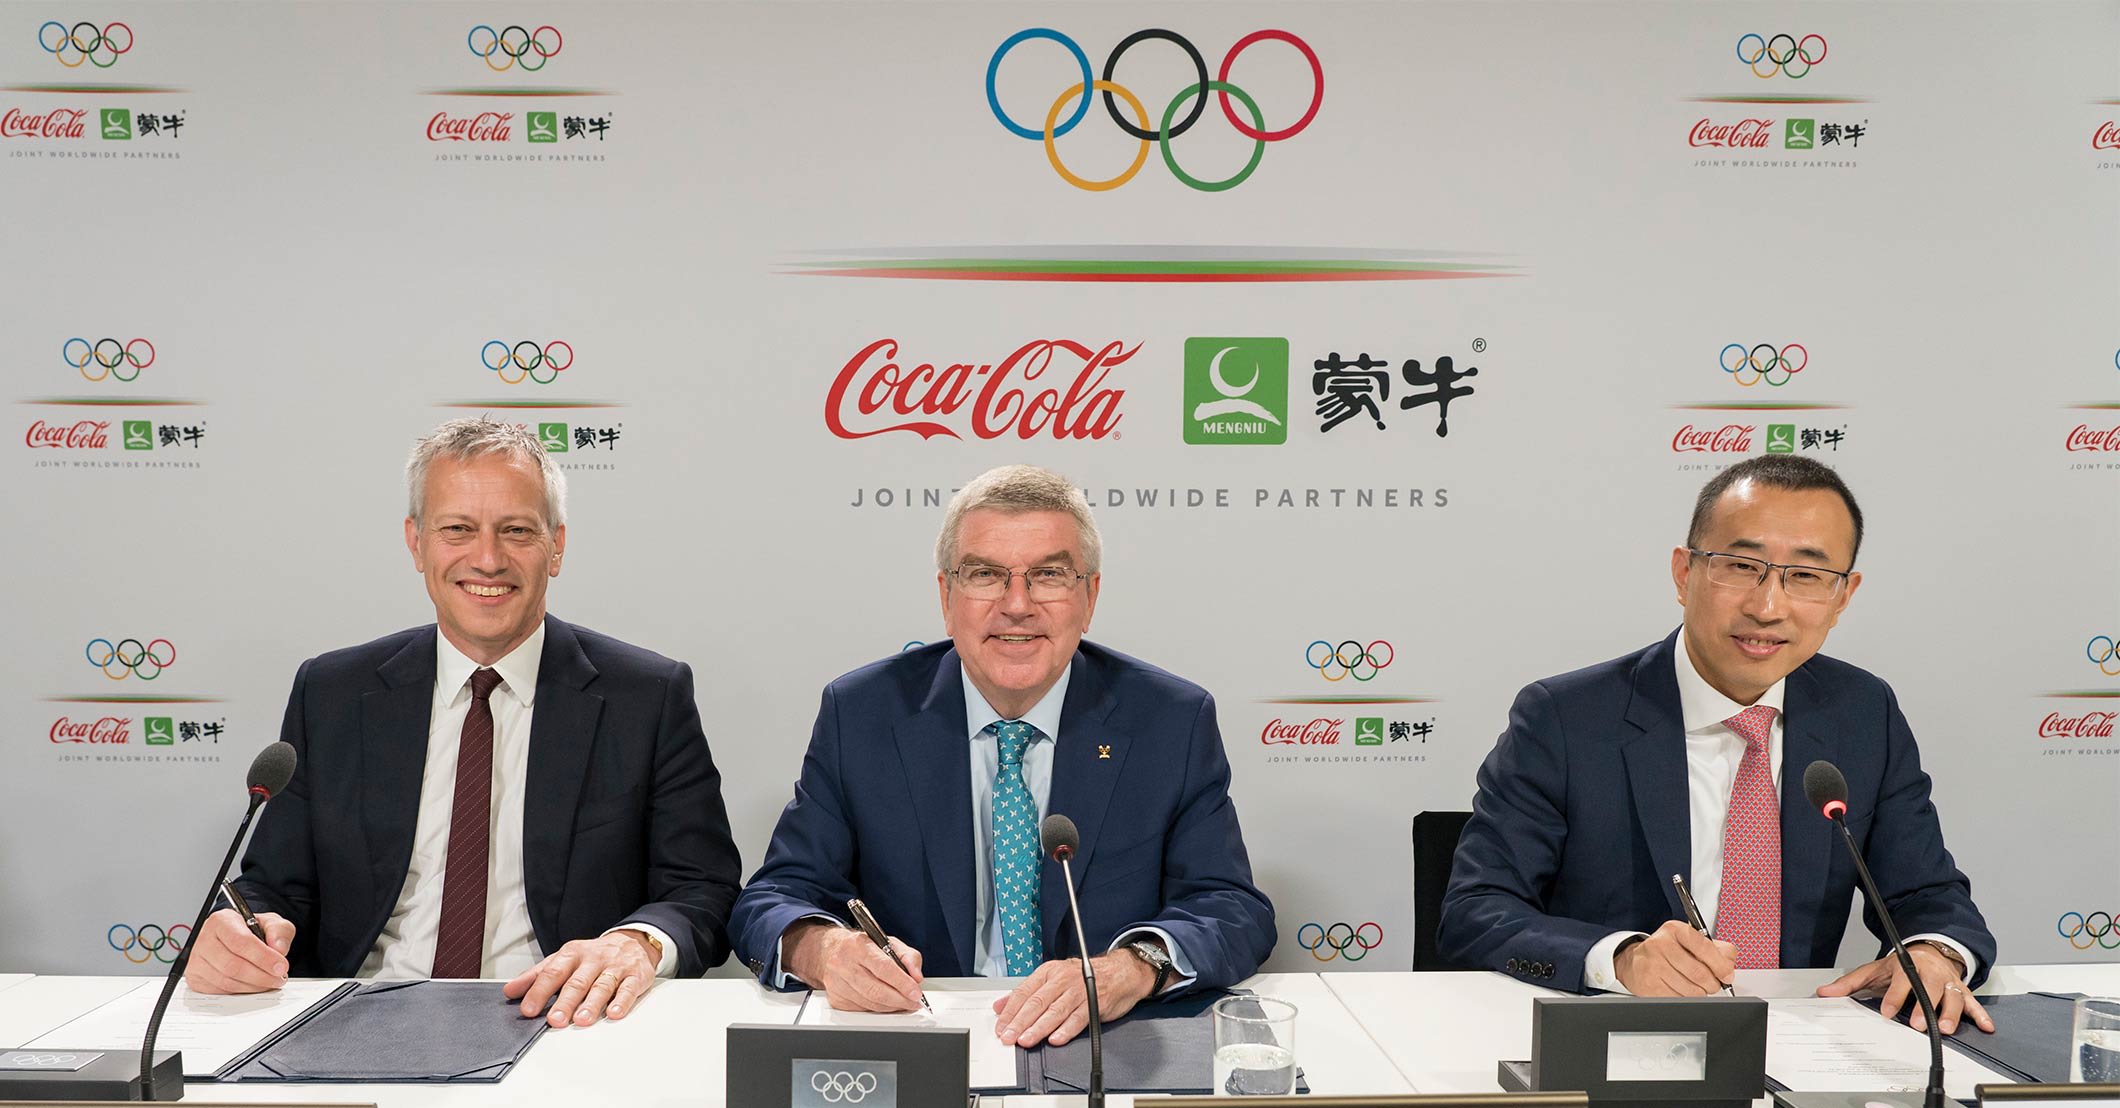 James Quincey, Chairman and CEO of The Coca-Cola Company - IOC President Thomas Bach - Jeffrey Lu, CEO and Executive Director of Mengniu (IOC/Greg Martin)